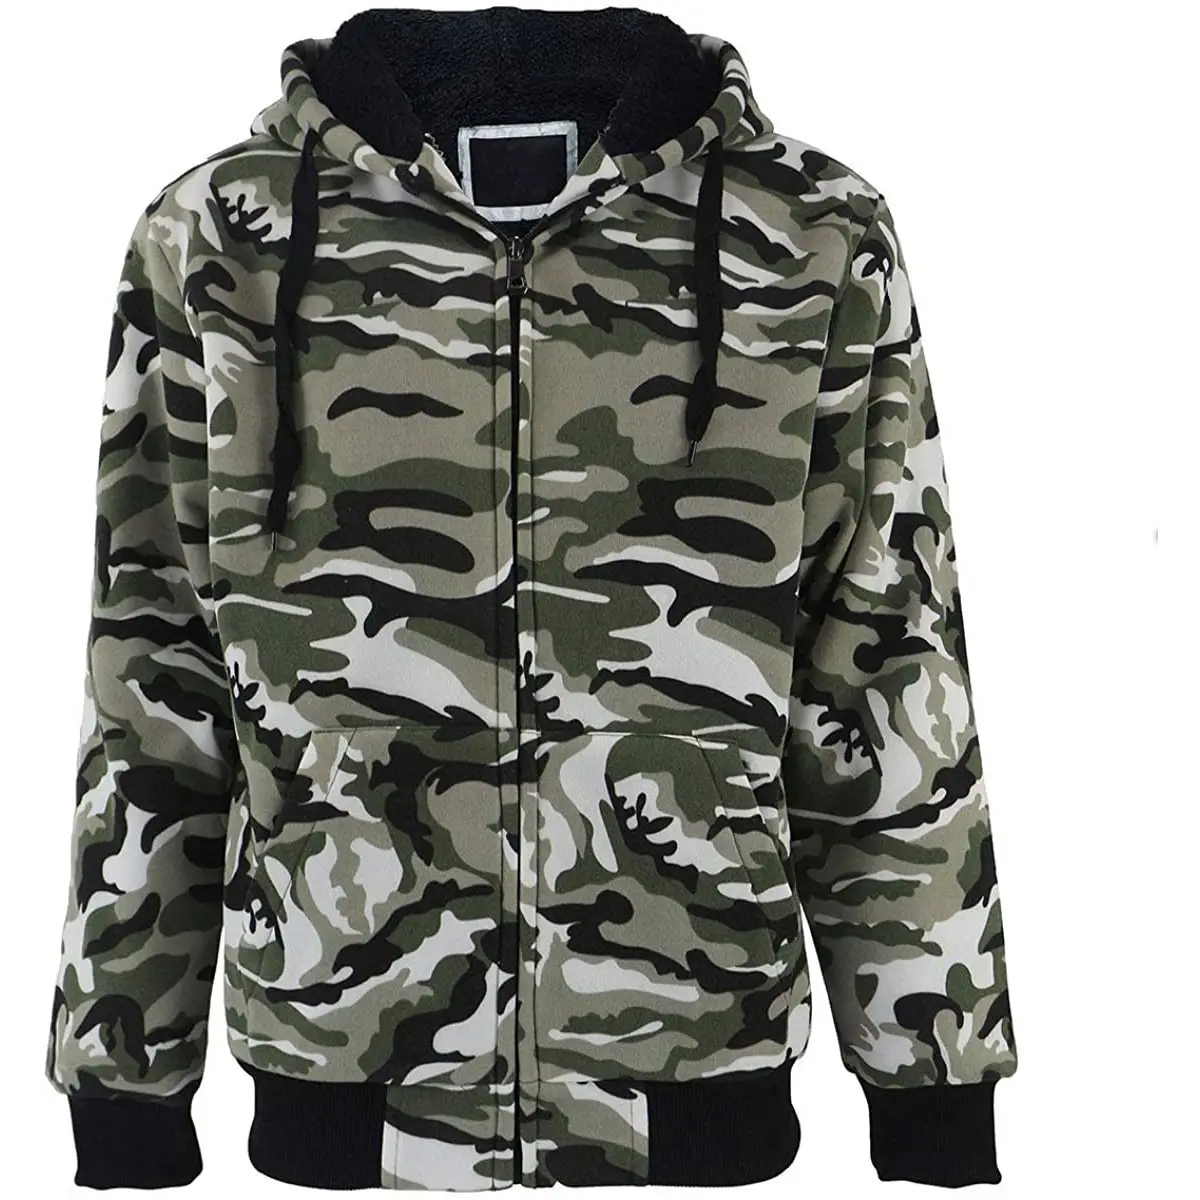 Plus Size camo printed S-5XL Marled Heavyweight Fleece Hoodie for Men Sherpa Lined Full Zip Up Long Sleeve Winter Jacket Coat